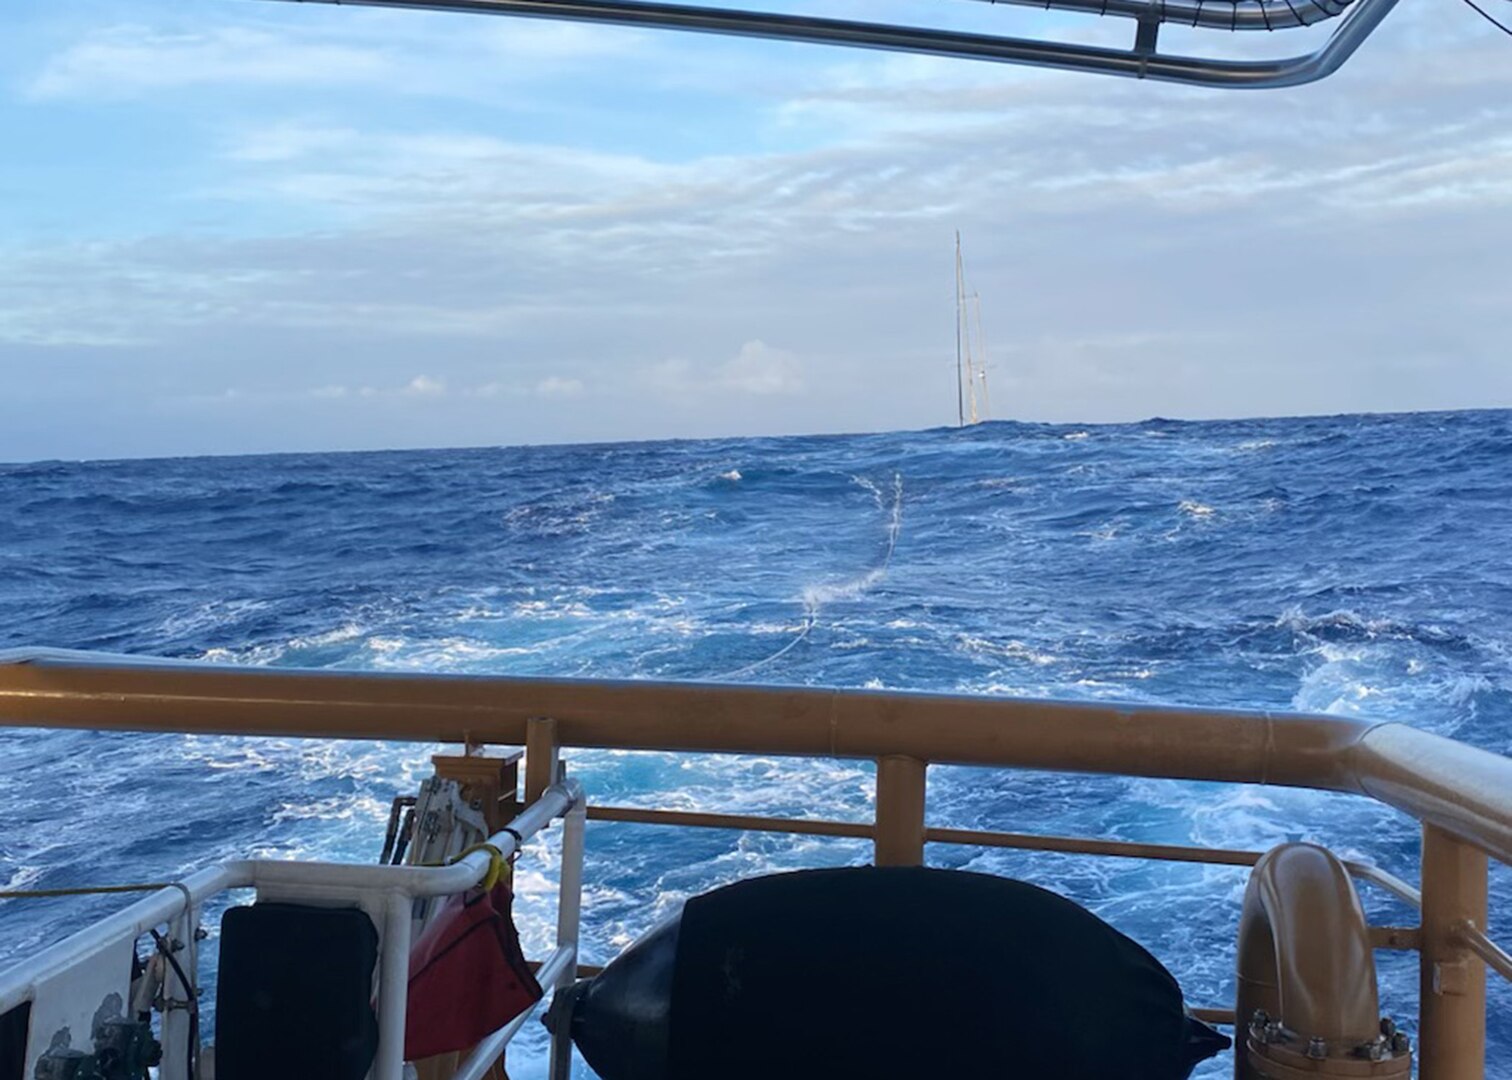 Coast Guard Assists 4 Mariners Aboard Disabled Vessel 180 Miles off Hawaii